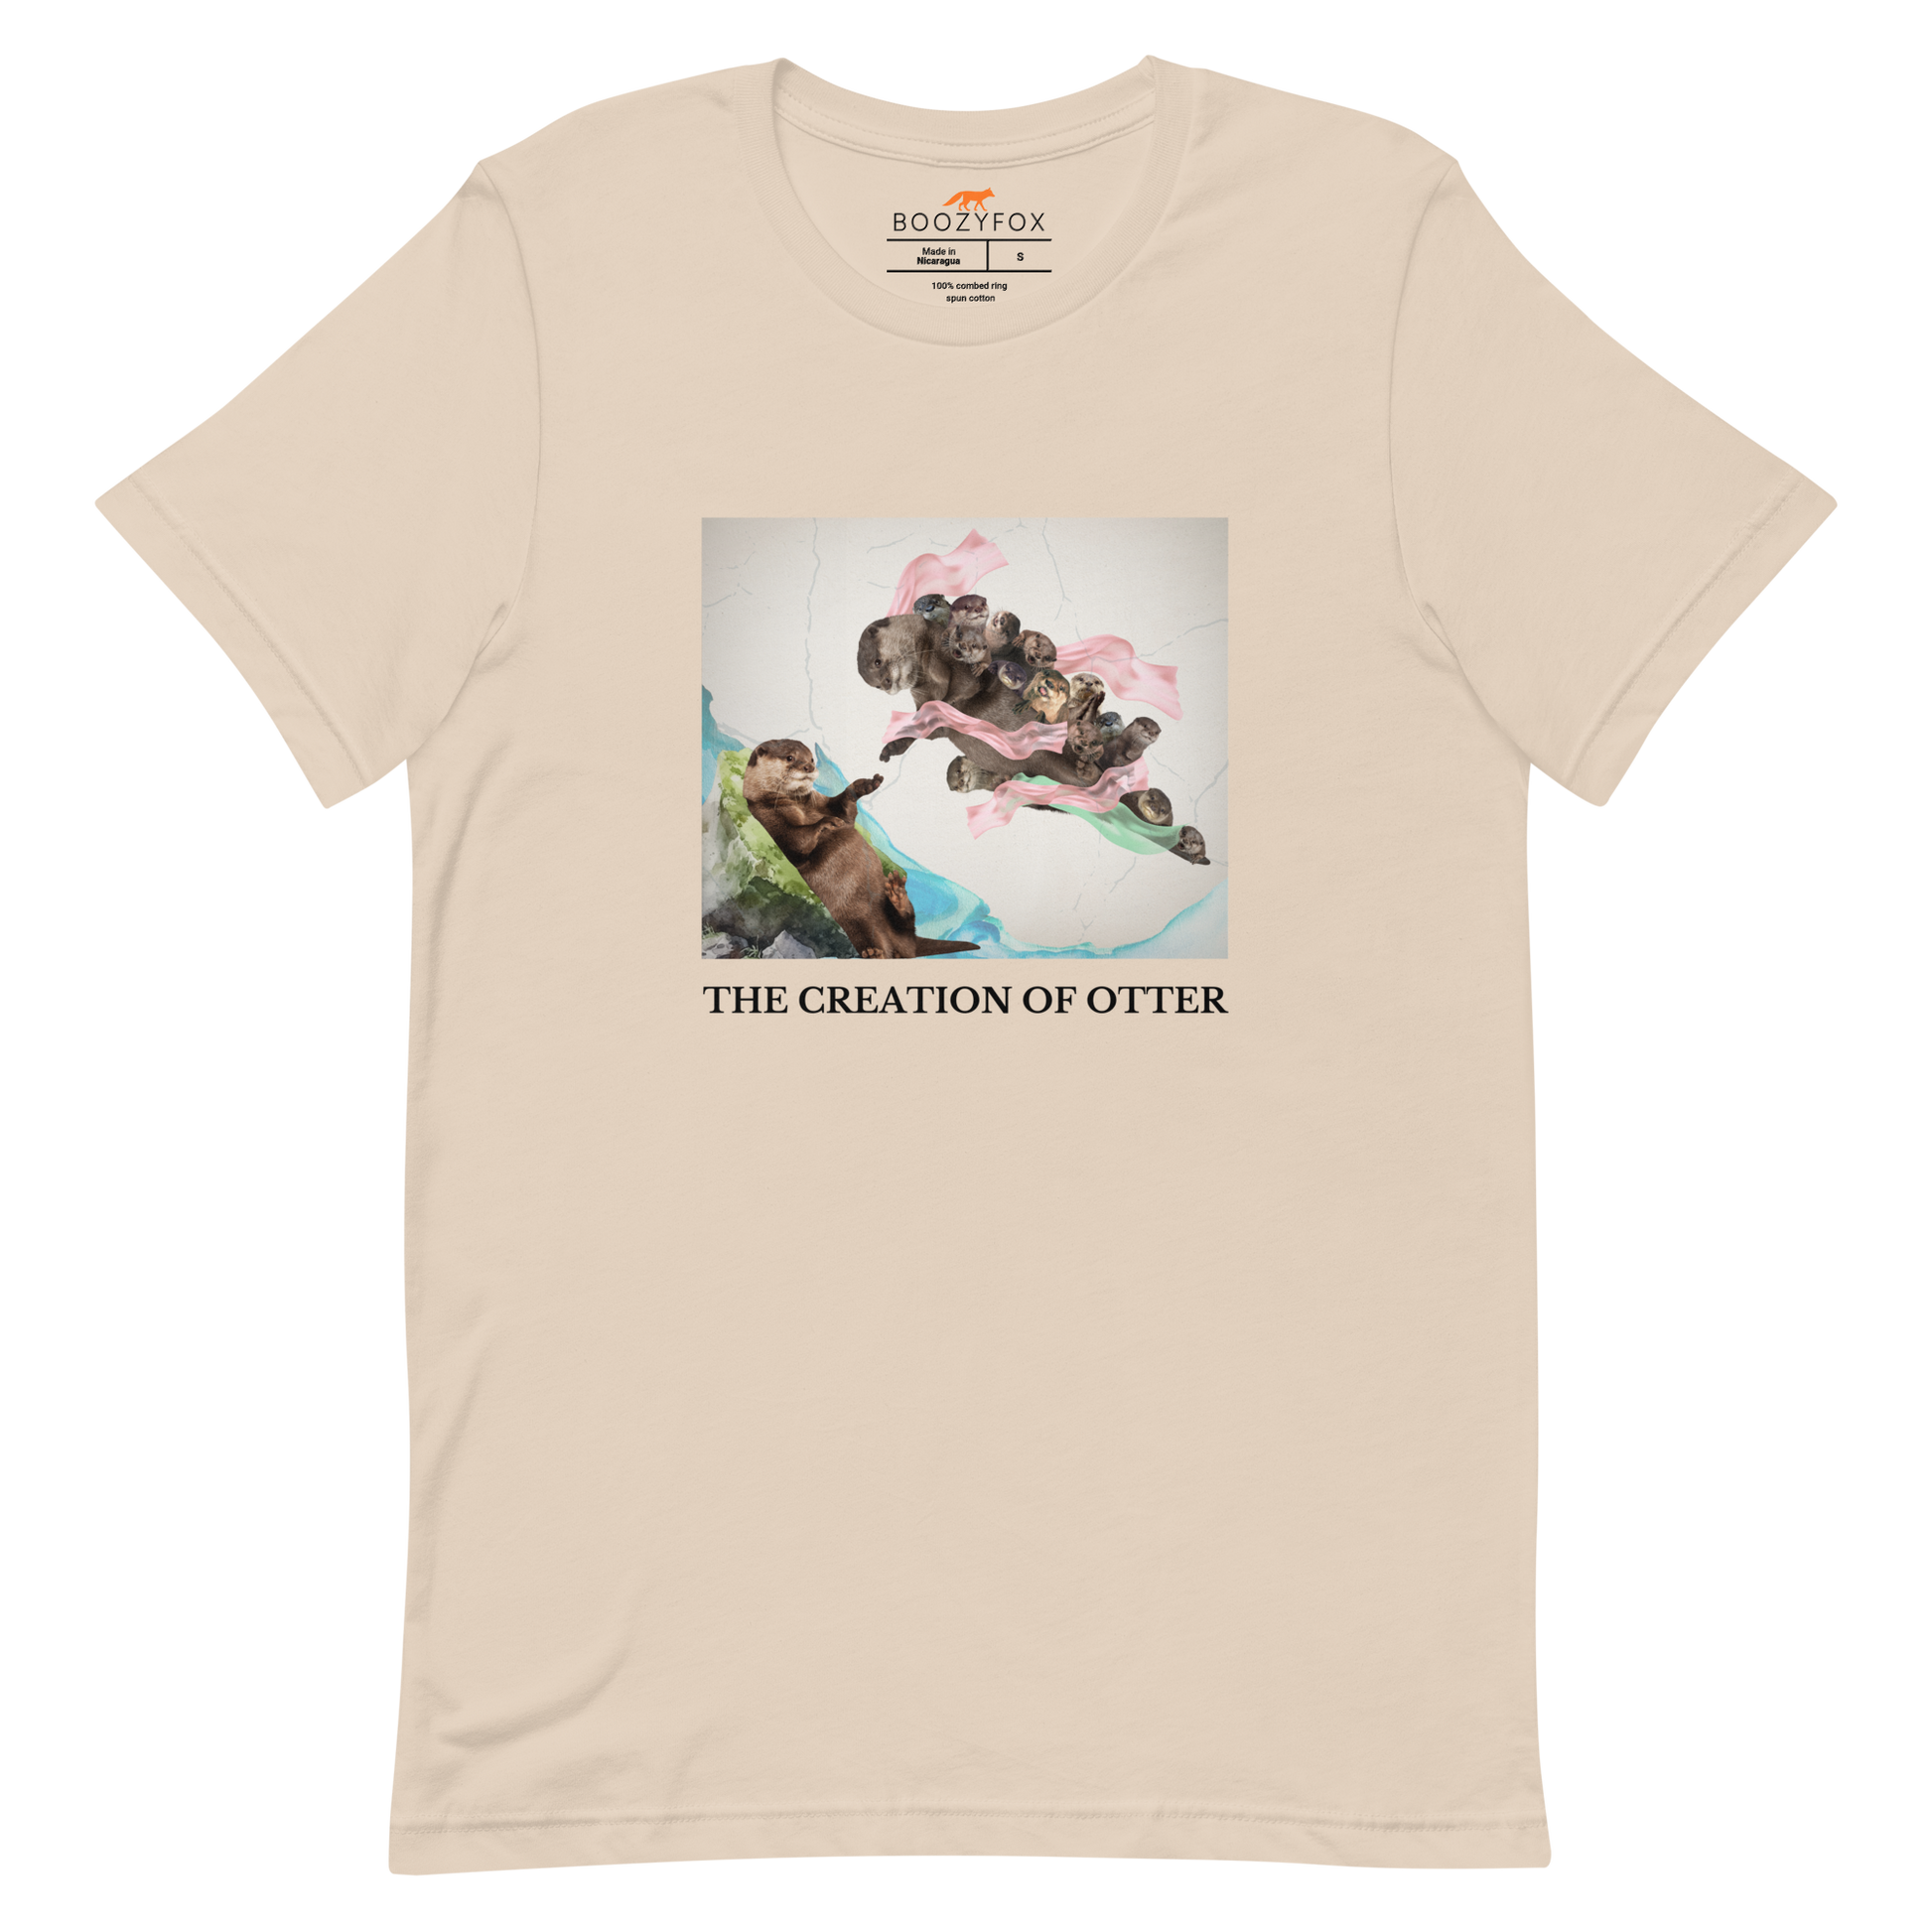 Soft Cream Premium Otter Tee featuring a playful The Creation of Otter parody of Michelangelo's masterpiece - Artsy/Funny Graphic Otter Tees - Boozy Fox